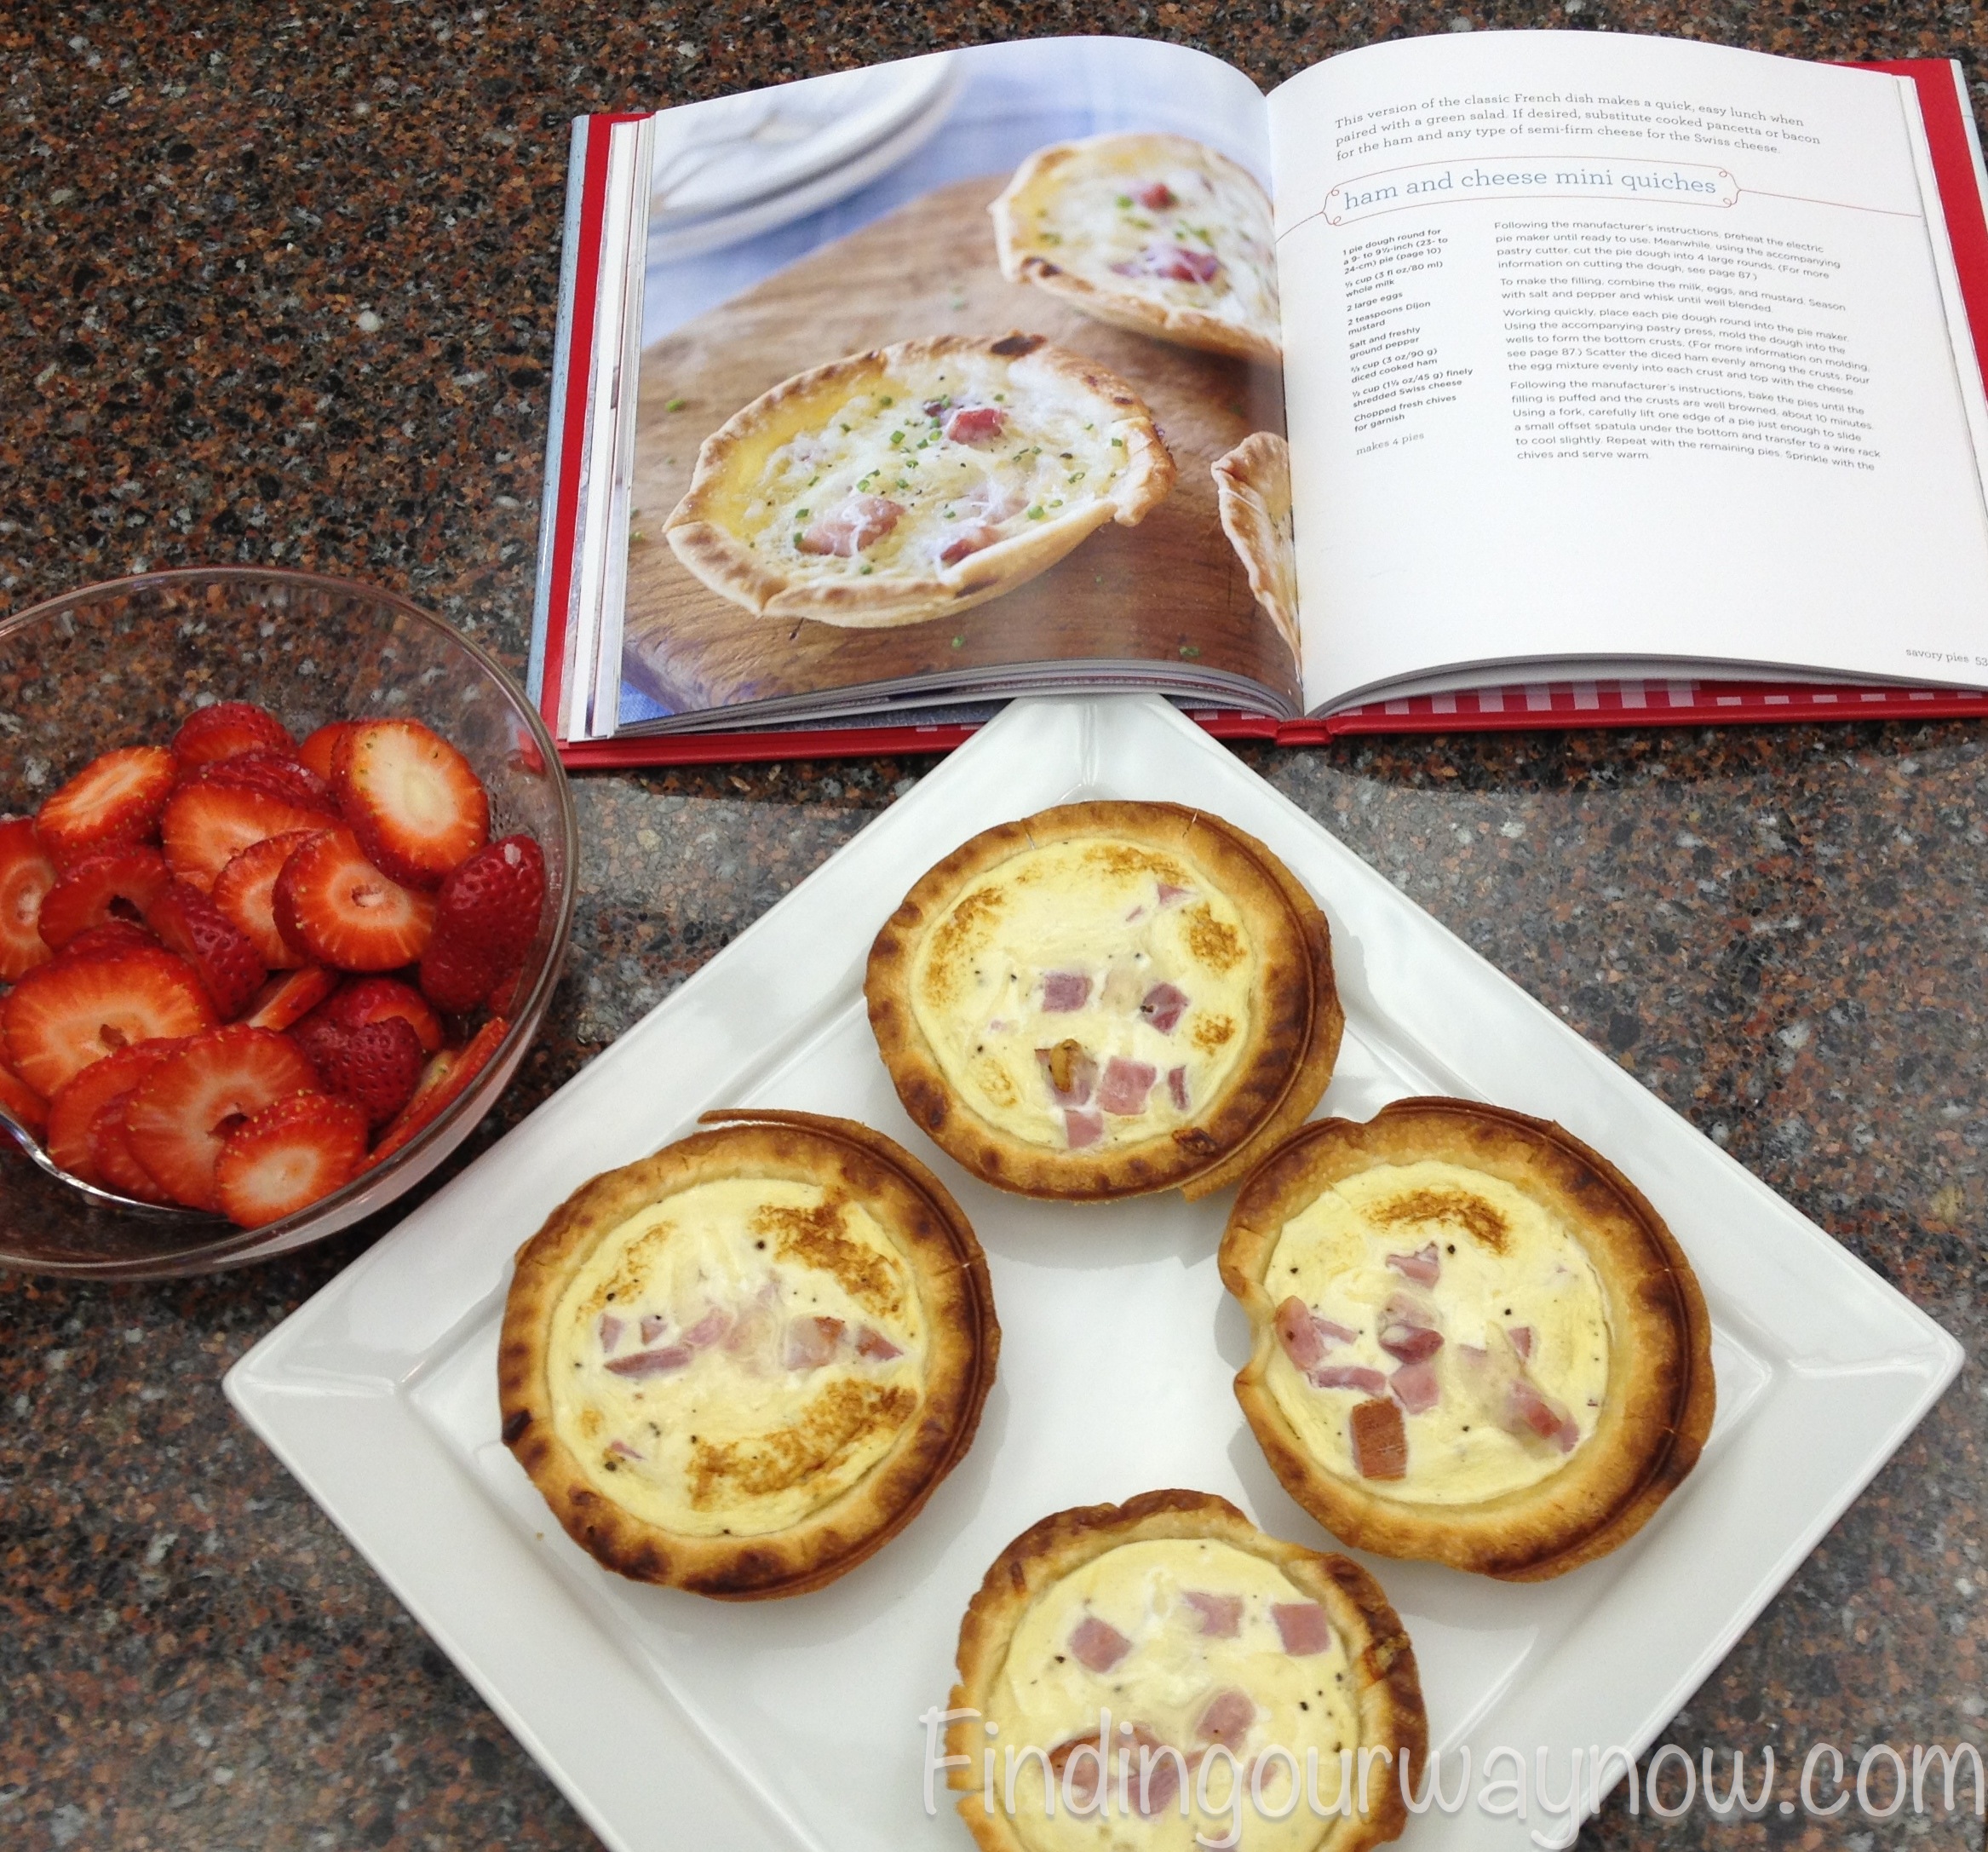 Egg & Cheese Biscuit in Dash Mini Pie Maker 